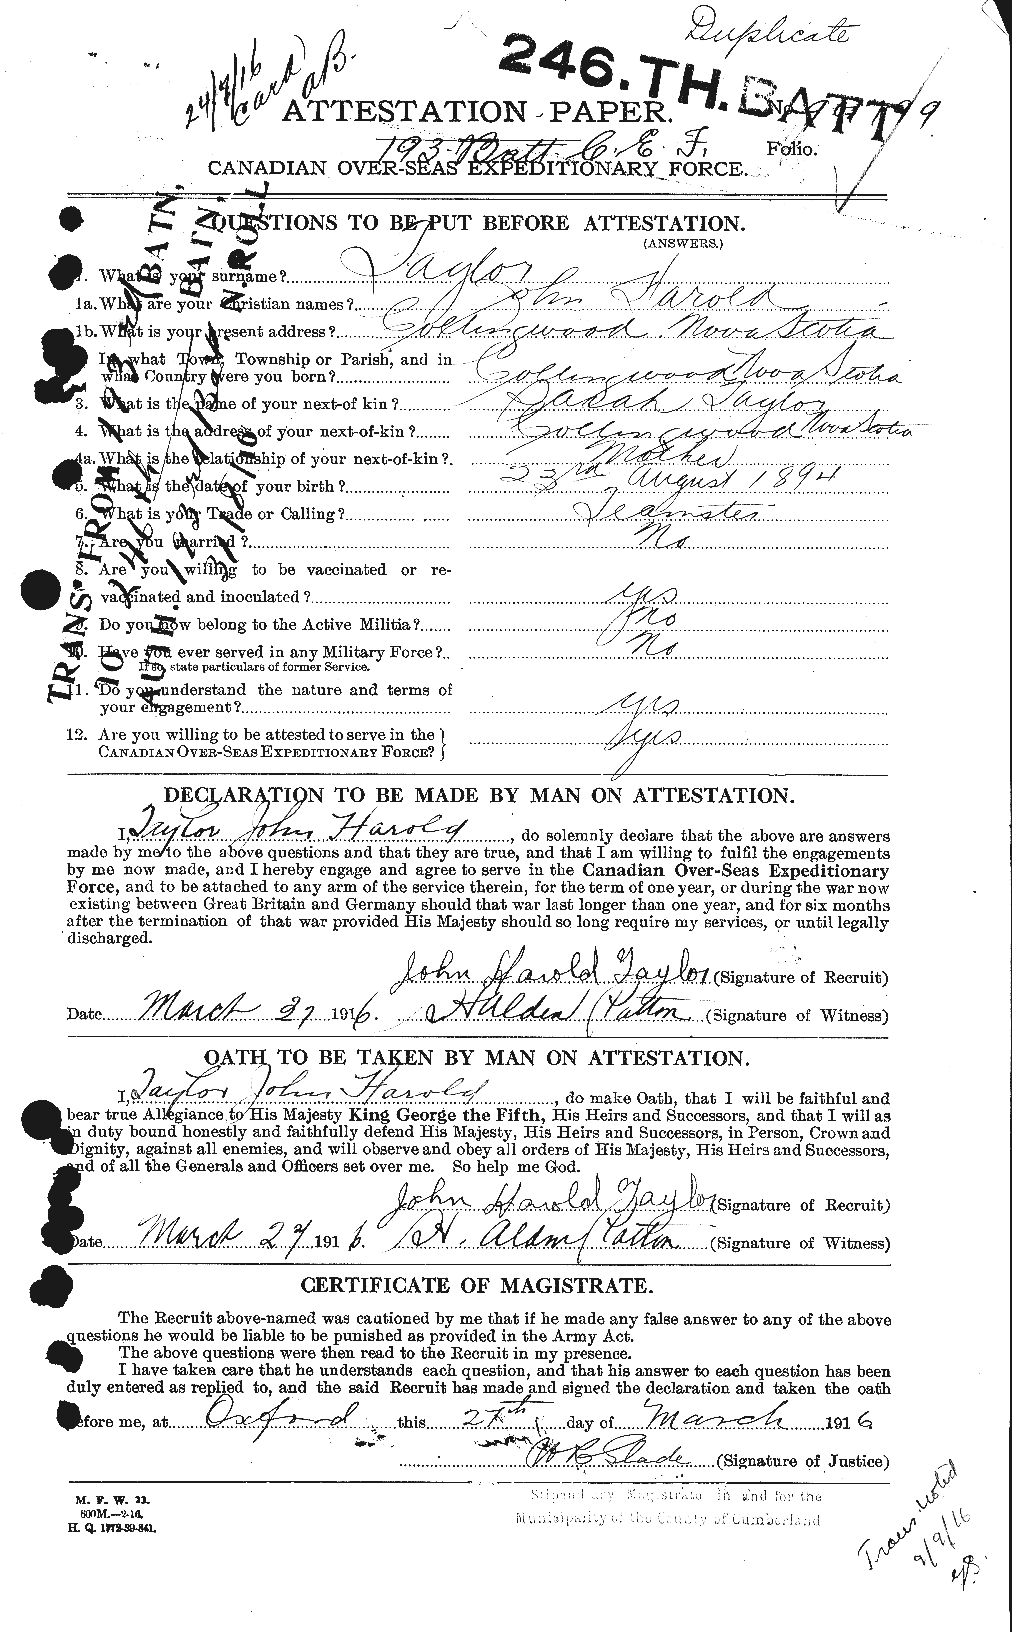 Personnel Records of the First World War - CEF 627105a